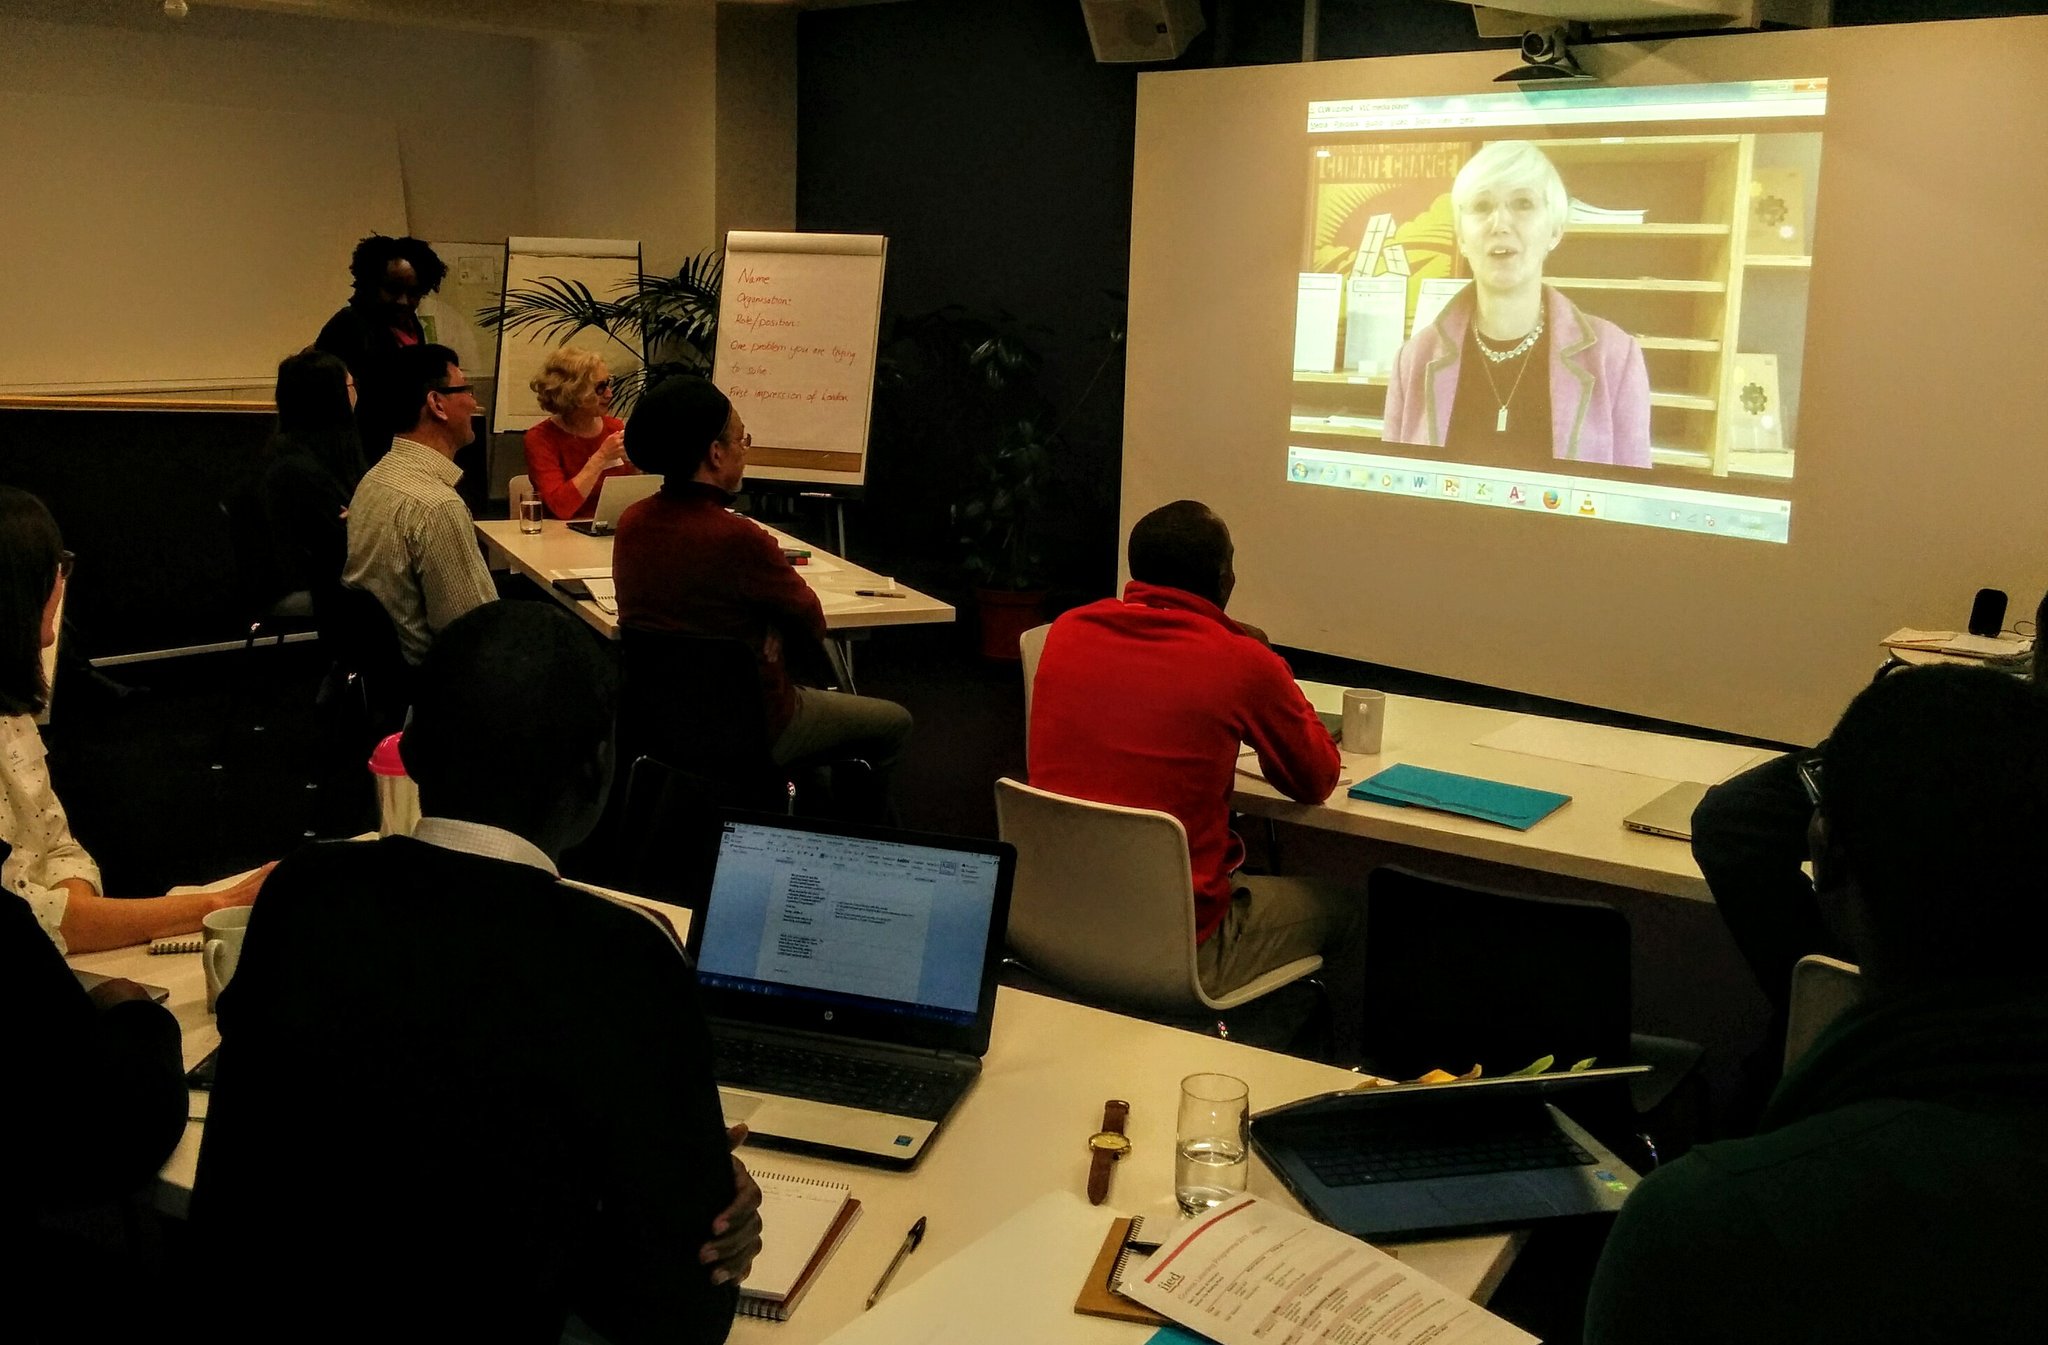 As the latest Communications Learning Week gets under way, @lizcarlile welcomes participants from Asia and Africa to @IIED via video #CLW17 https://t.co/EWOZihkBzN